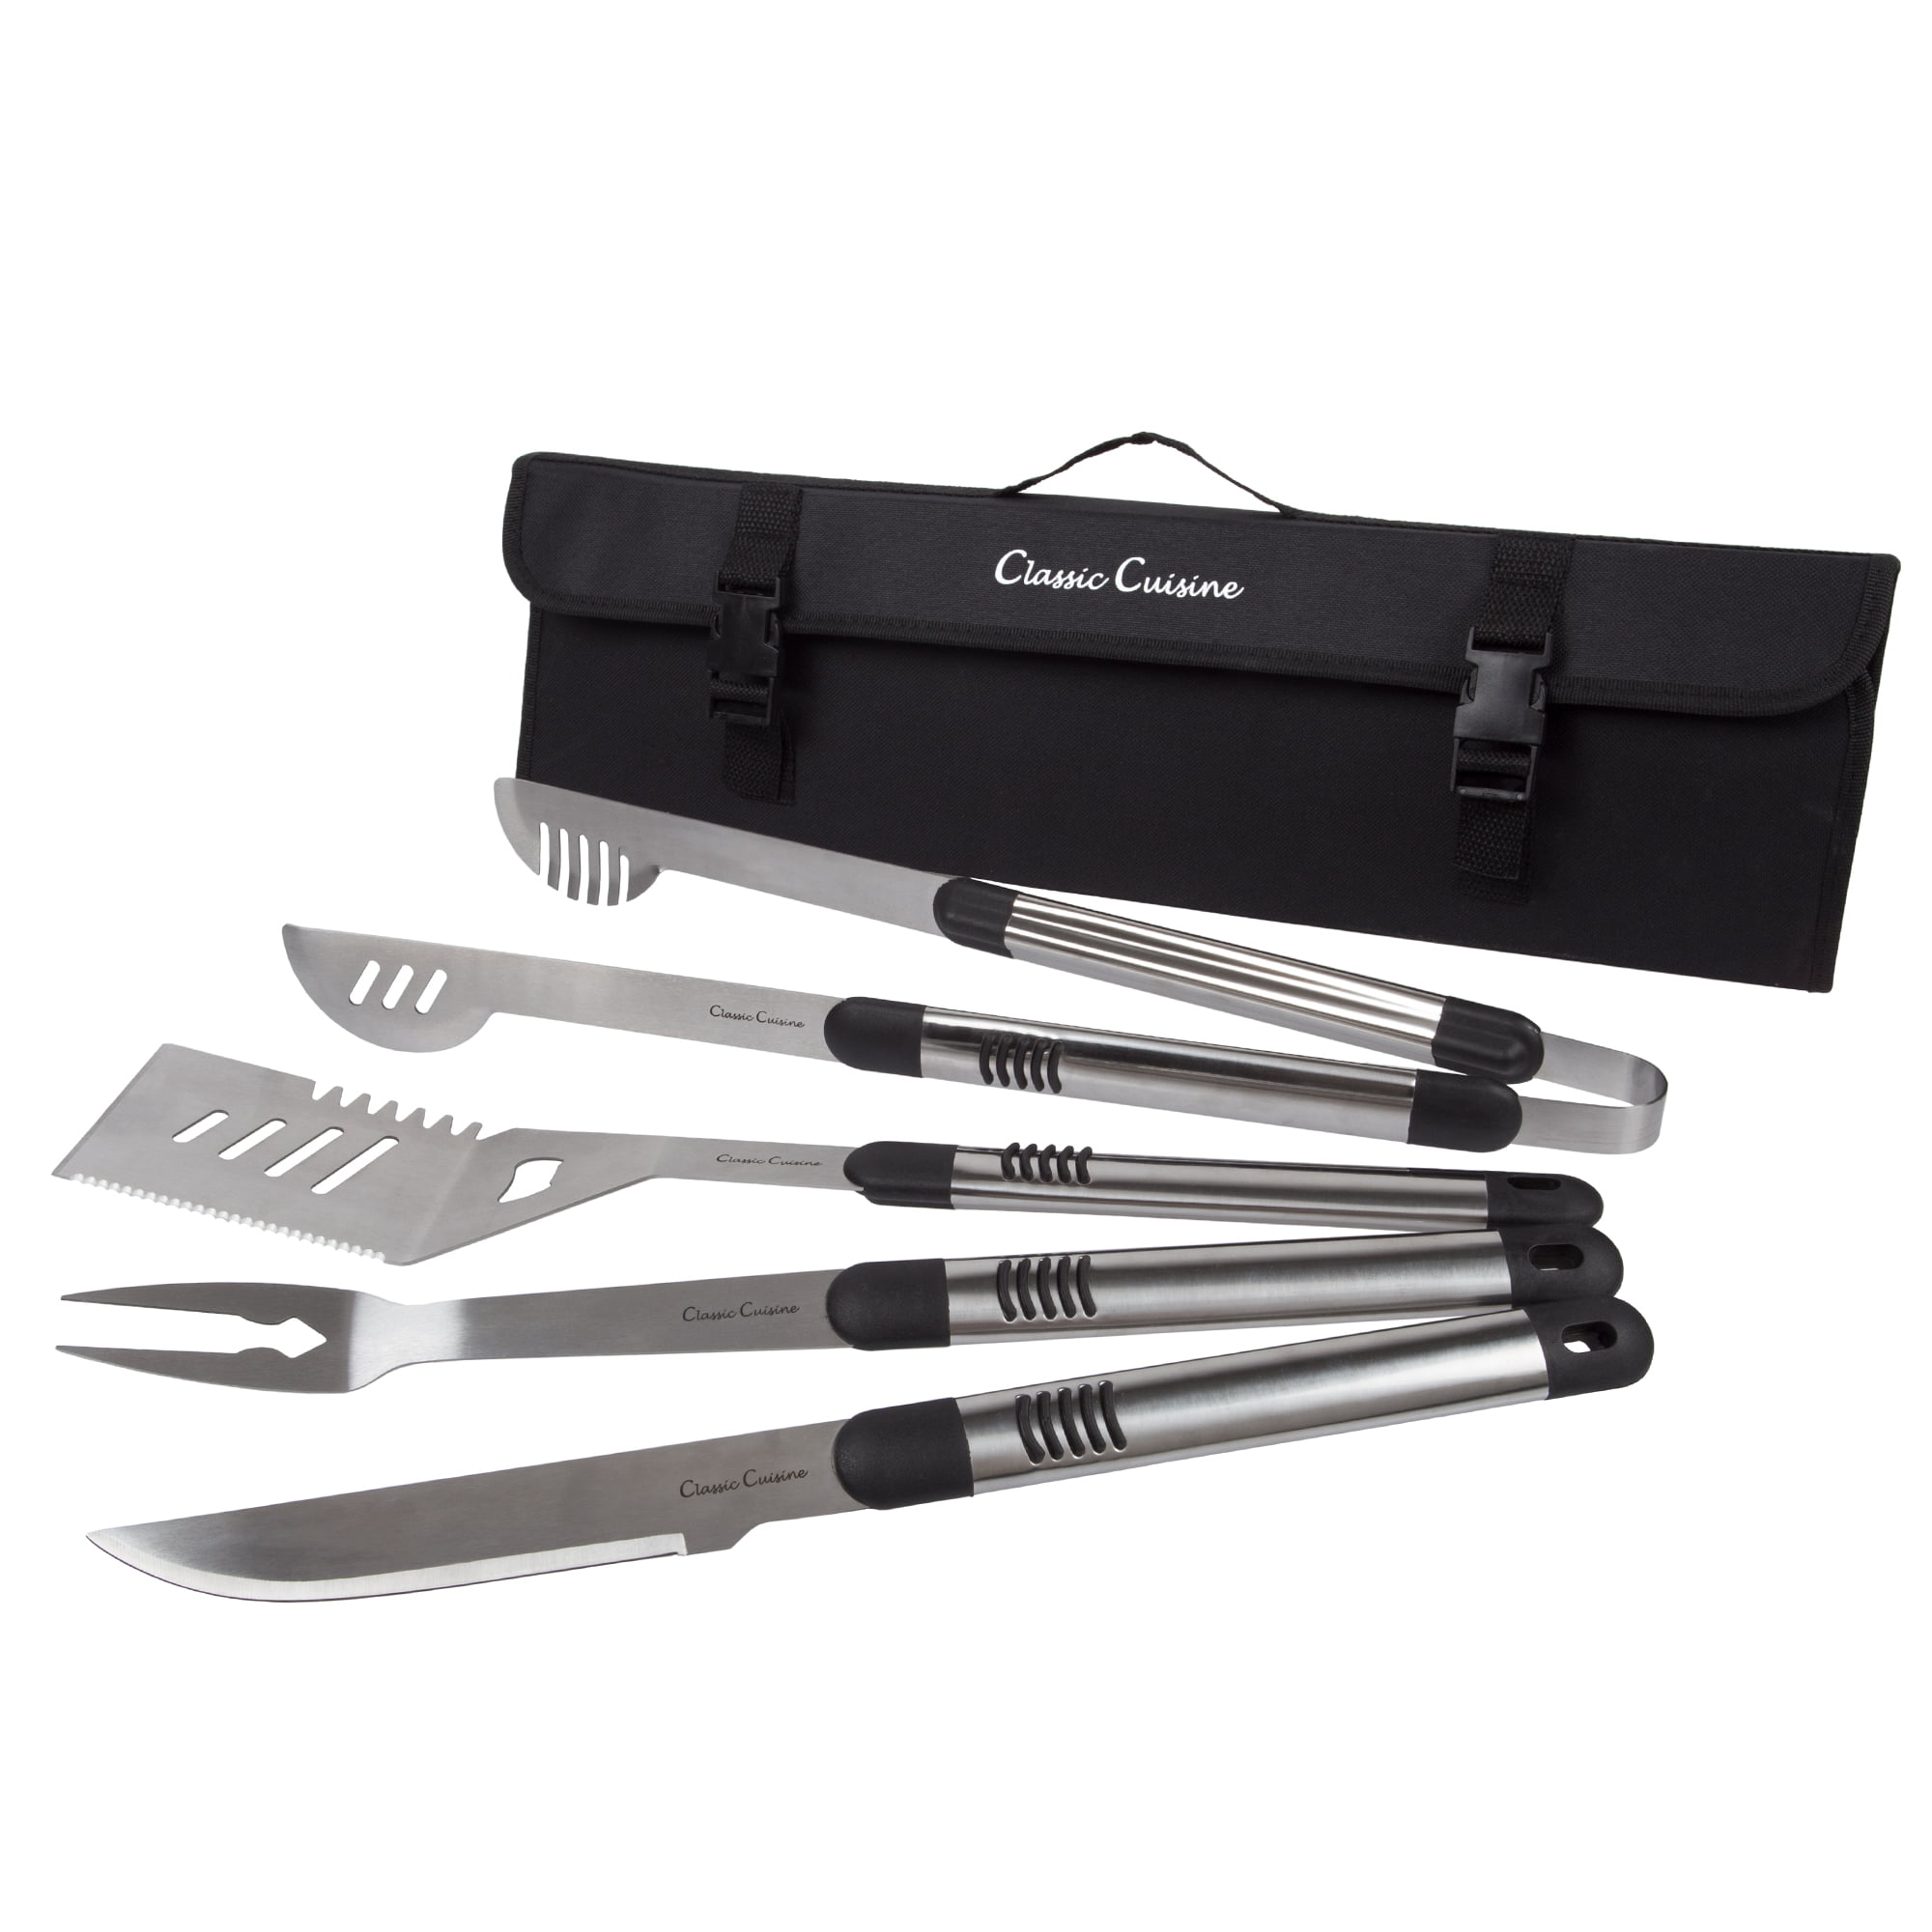 BBQ Grill Tools 5 Piece Stainless Steel Set, Barbecue Grilling Utensils Kit  in Heavy Duty Nylon Travel and Storage Roll Bag by Classic Cuisine